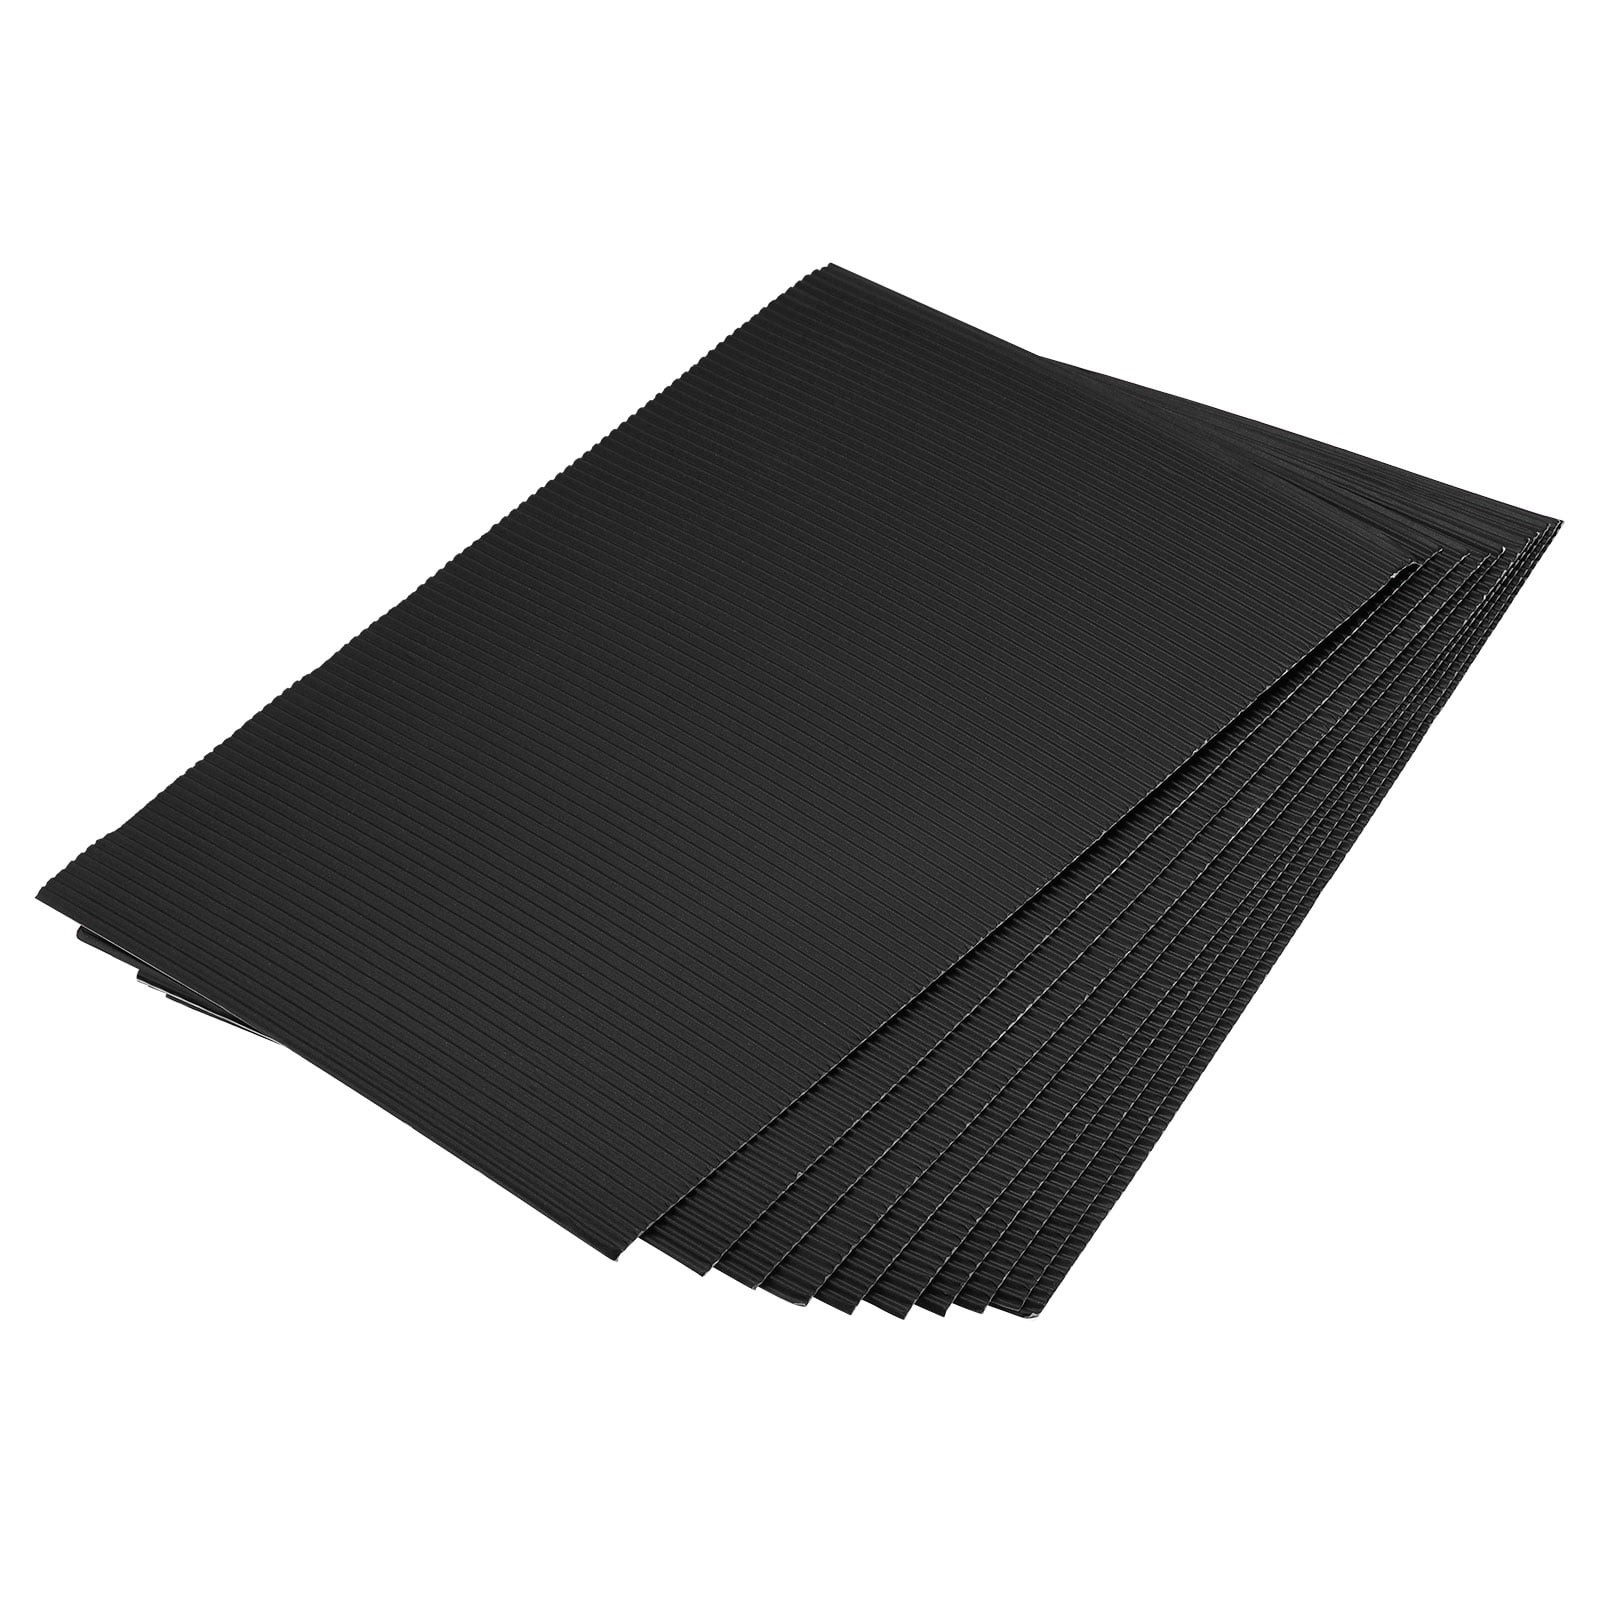 Corrugated Paper Sheets 25pcs 11.8-inch x 7.87-inch Black Cardboard for DIY  Craft 